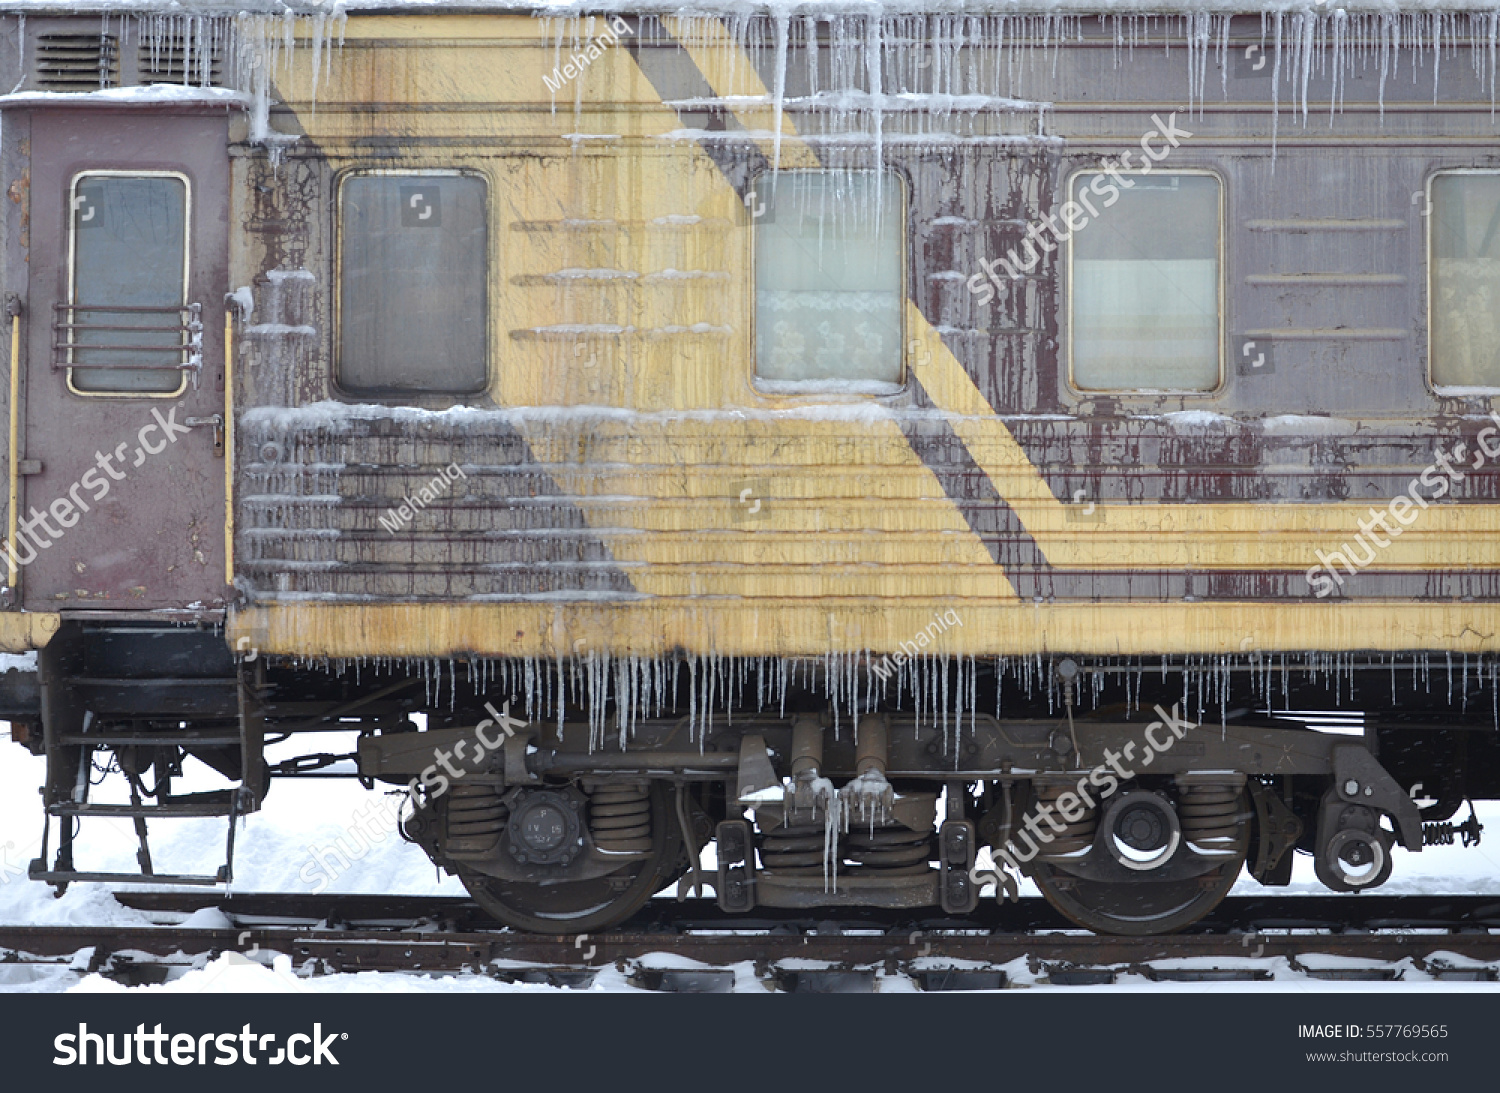 Detailed photo of a frozen car passenger train with icicles and ice on its surface. Railway in the cold winter season #557769565